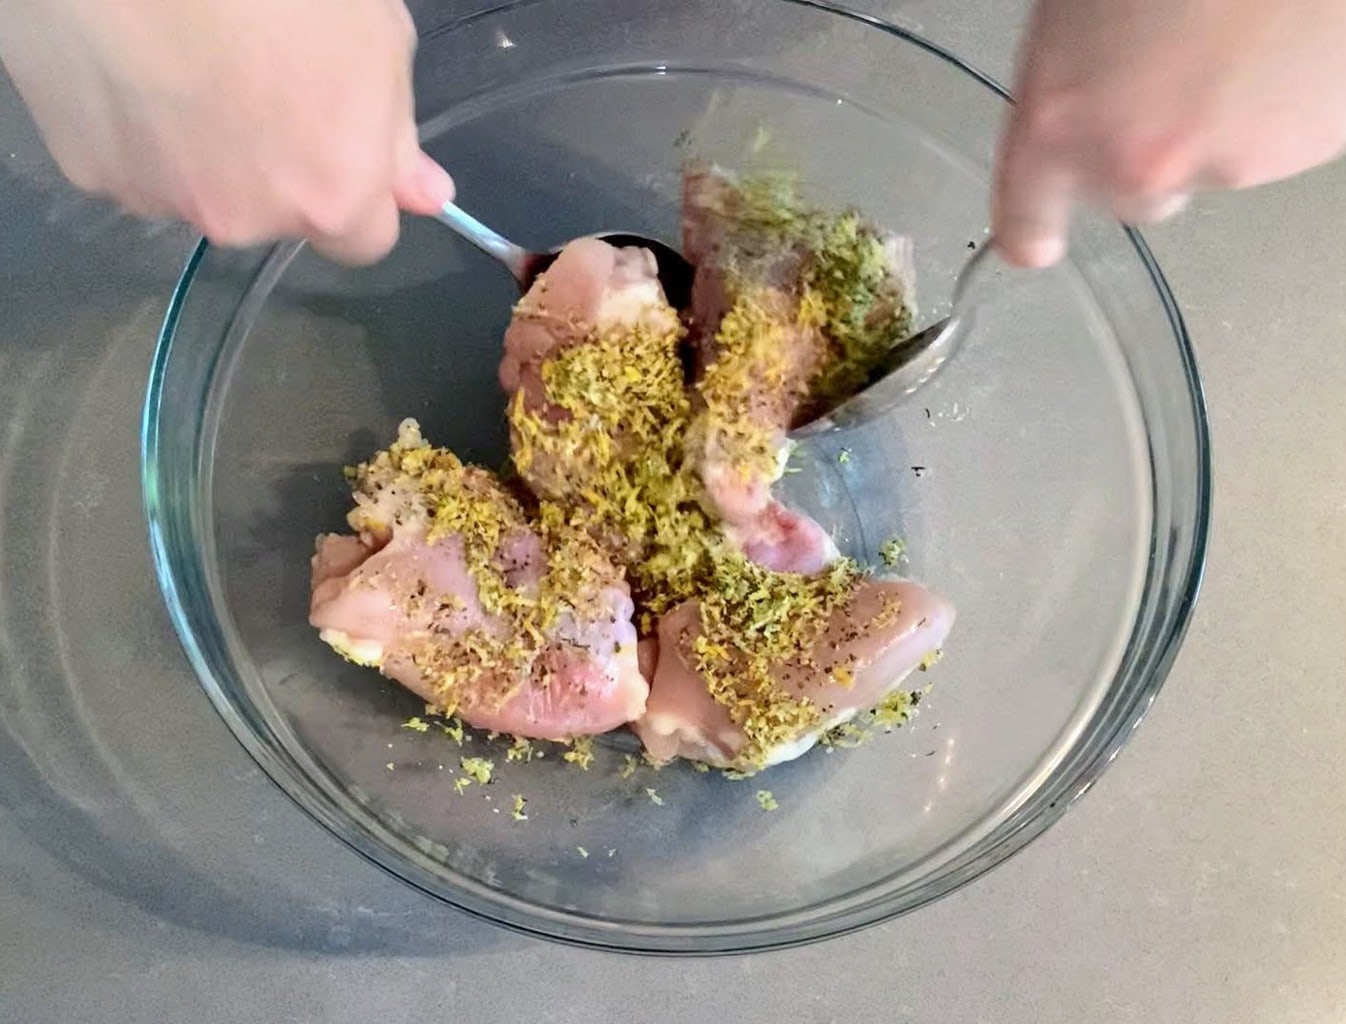 Hands tossing chicken and flavorings, in a clear bowl